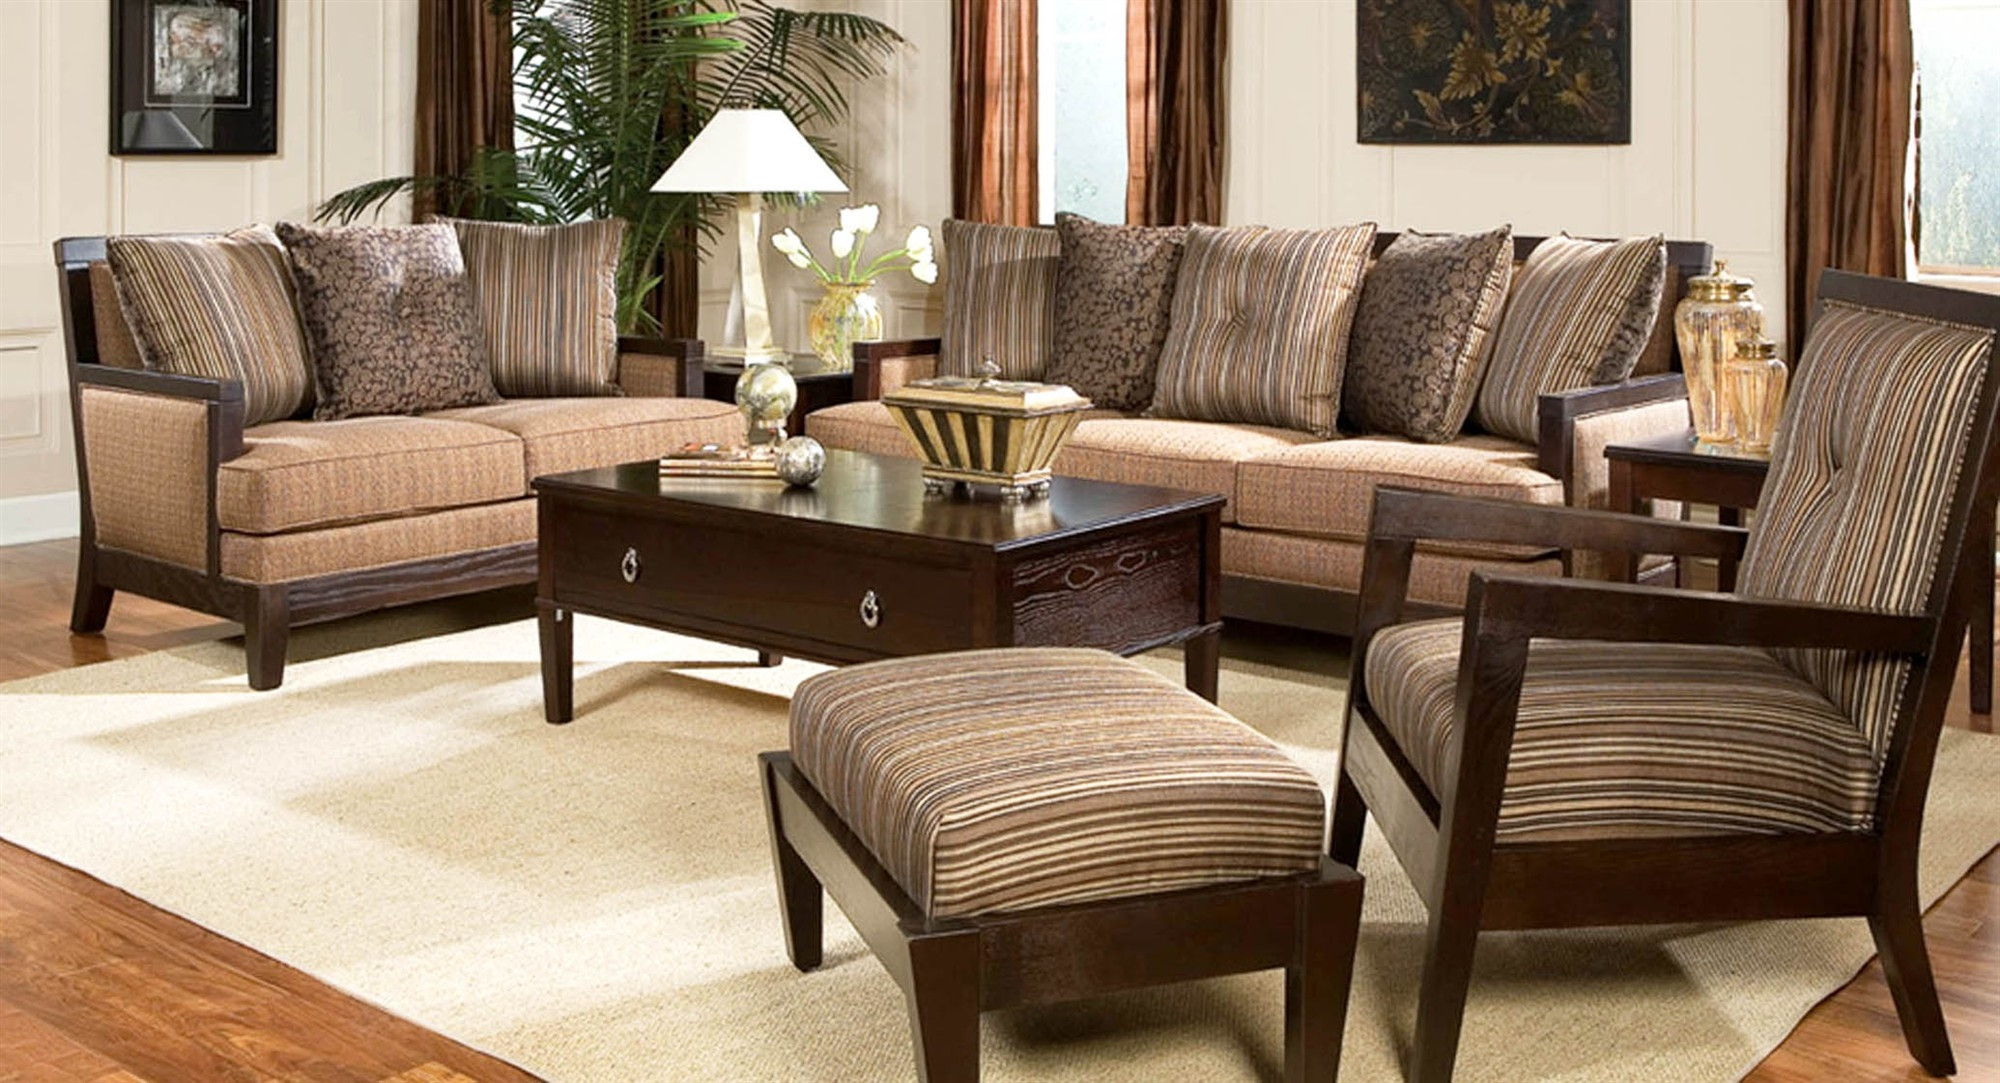 Inexpensive Living Room Chair
 15 s Striped Sofas and Chairs